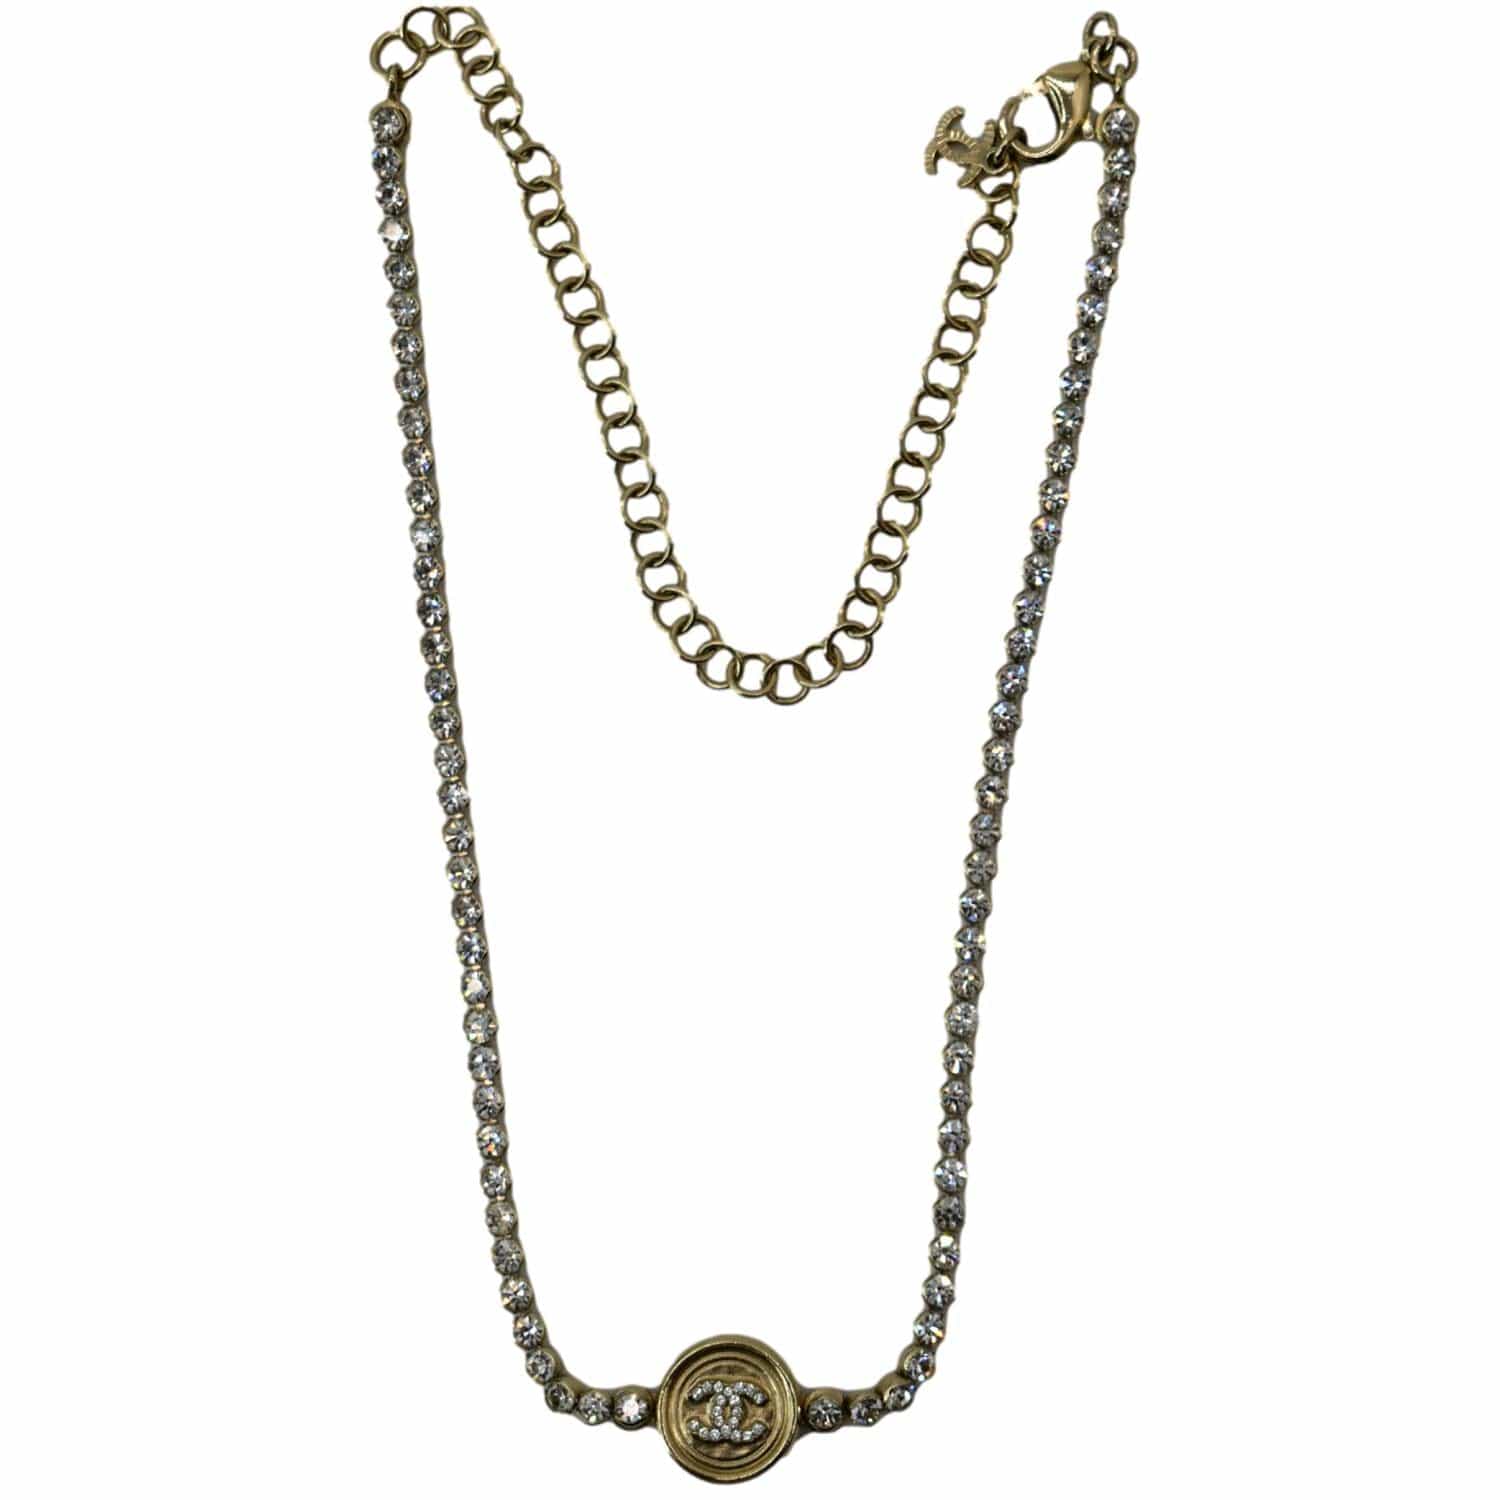 gold chanel chain necklace